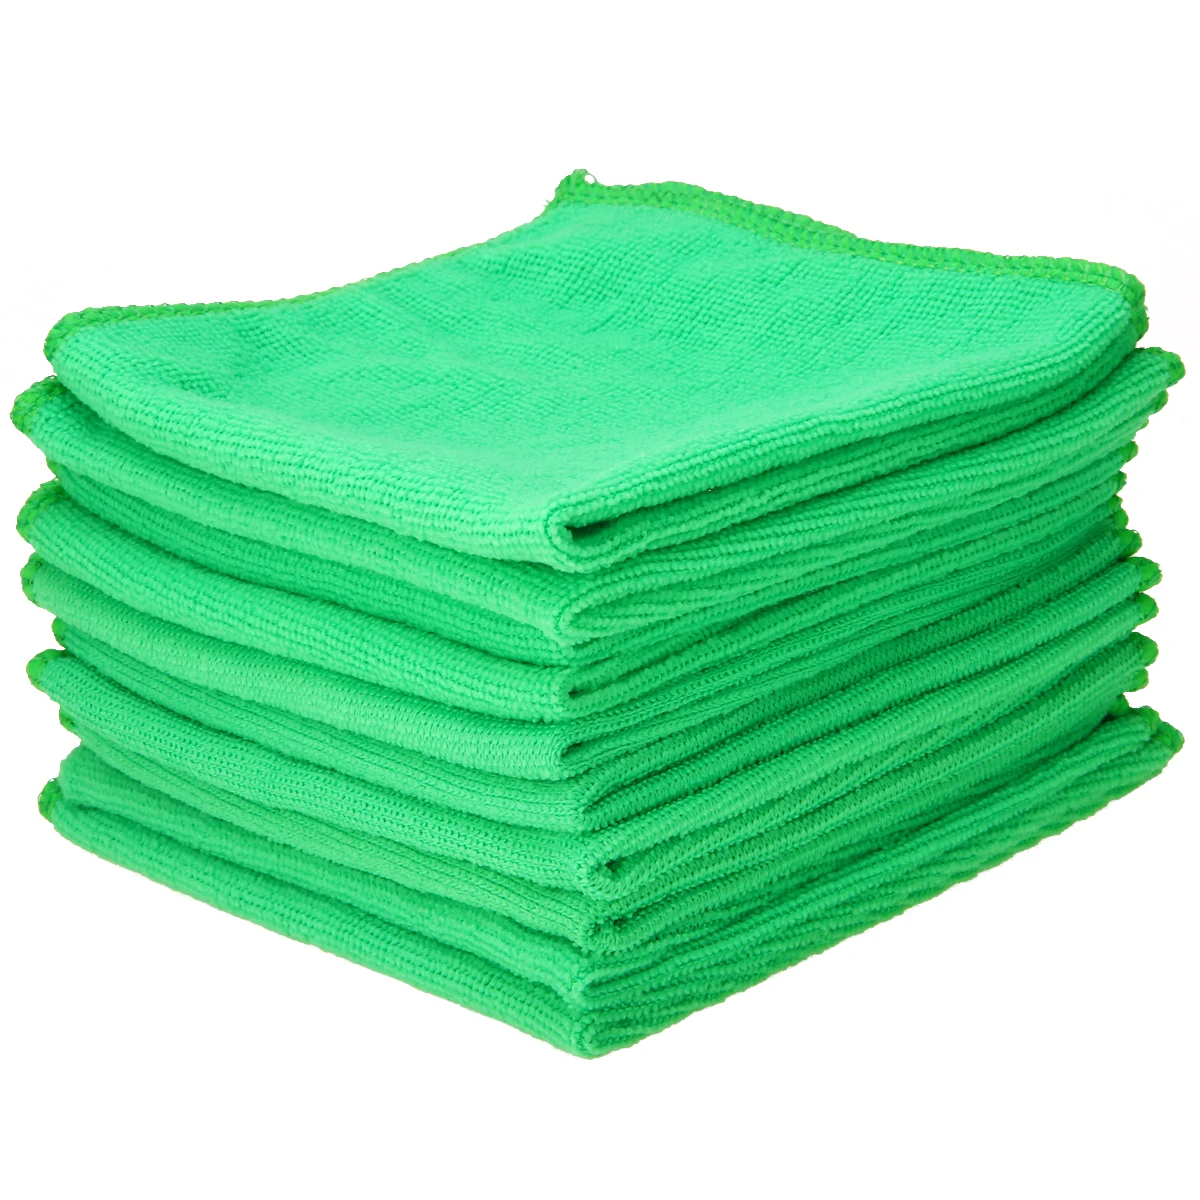 Green Microfiber Cleaning Auto Car Detailing Soft Clothes Towel-Duster Wash N2B9 